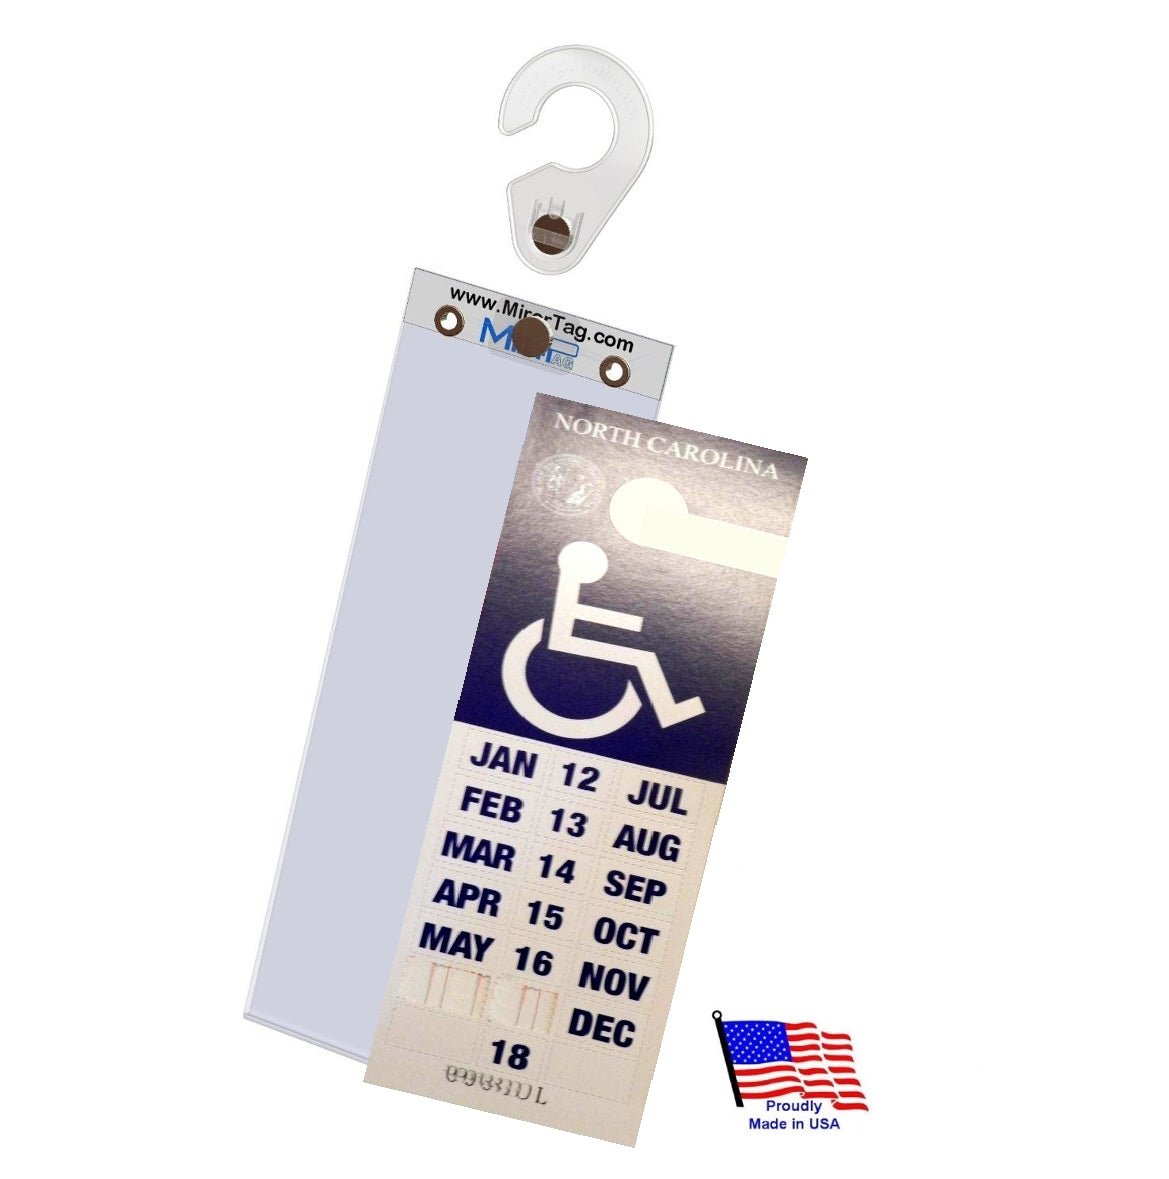 MirorTag Gold Plus™- Sturdy Handicapped Parking Placard Holder & Protector. Fits NC state long size tag. Sun & Cold resistant. Magnetically attach & Detach your Permit. Made in USA